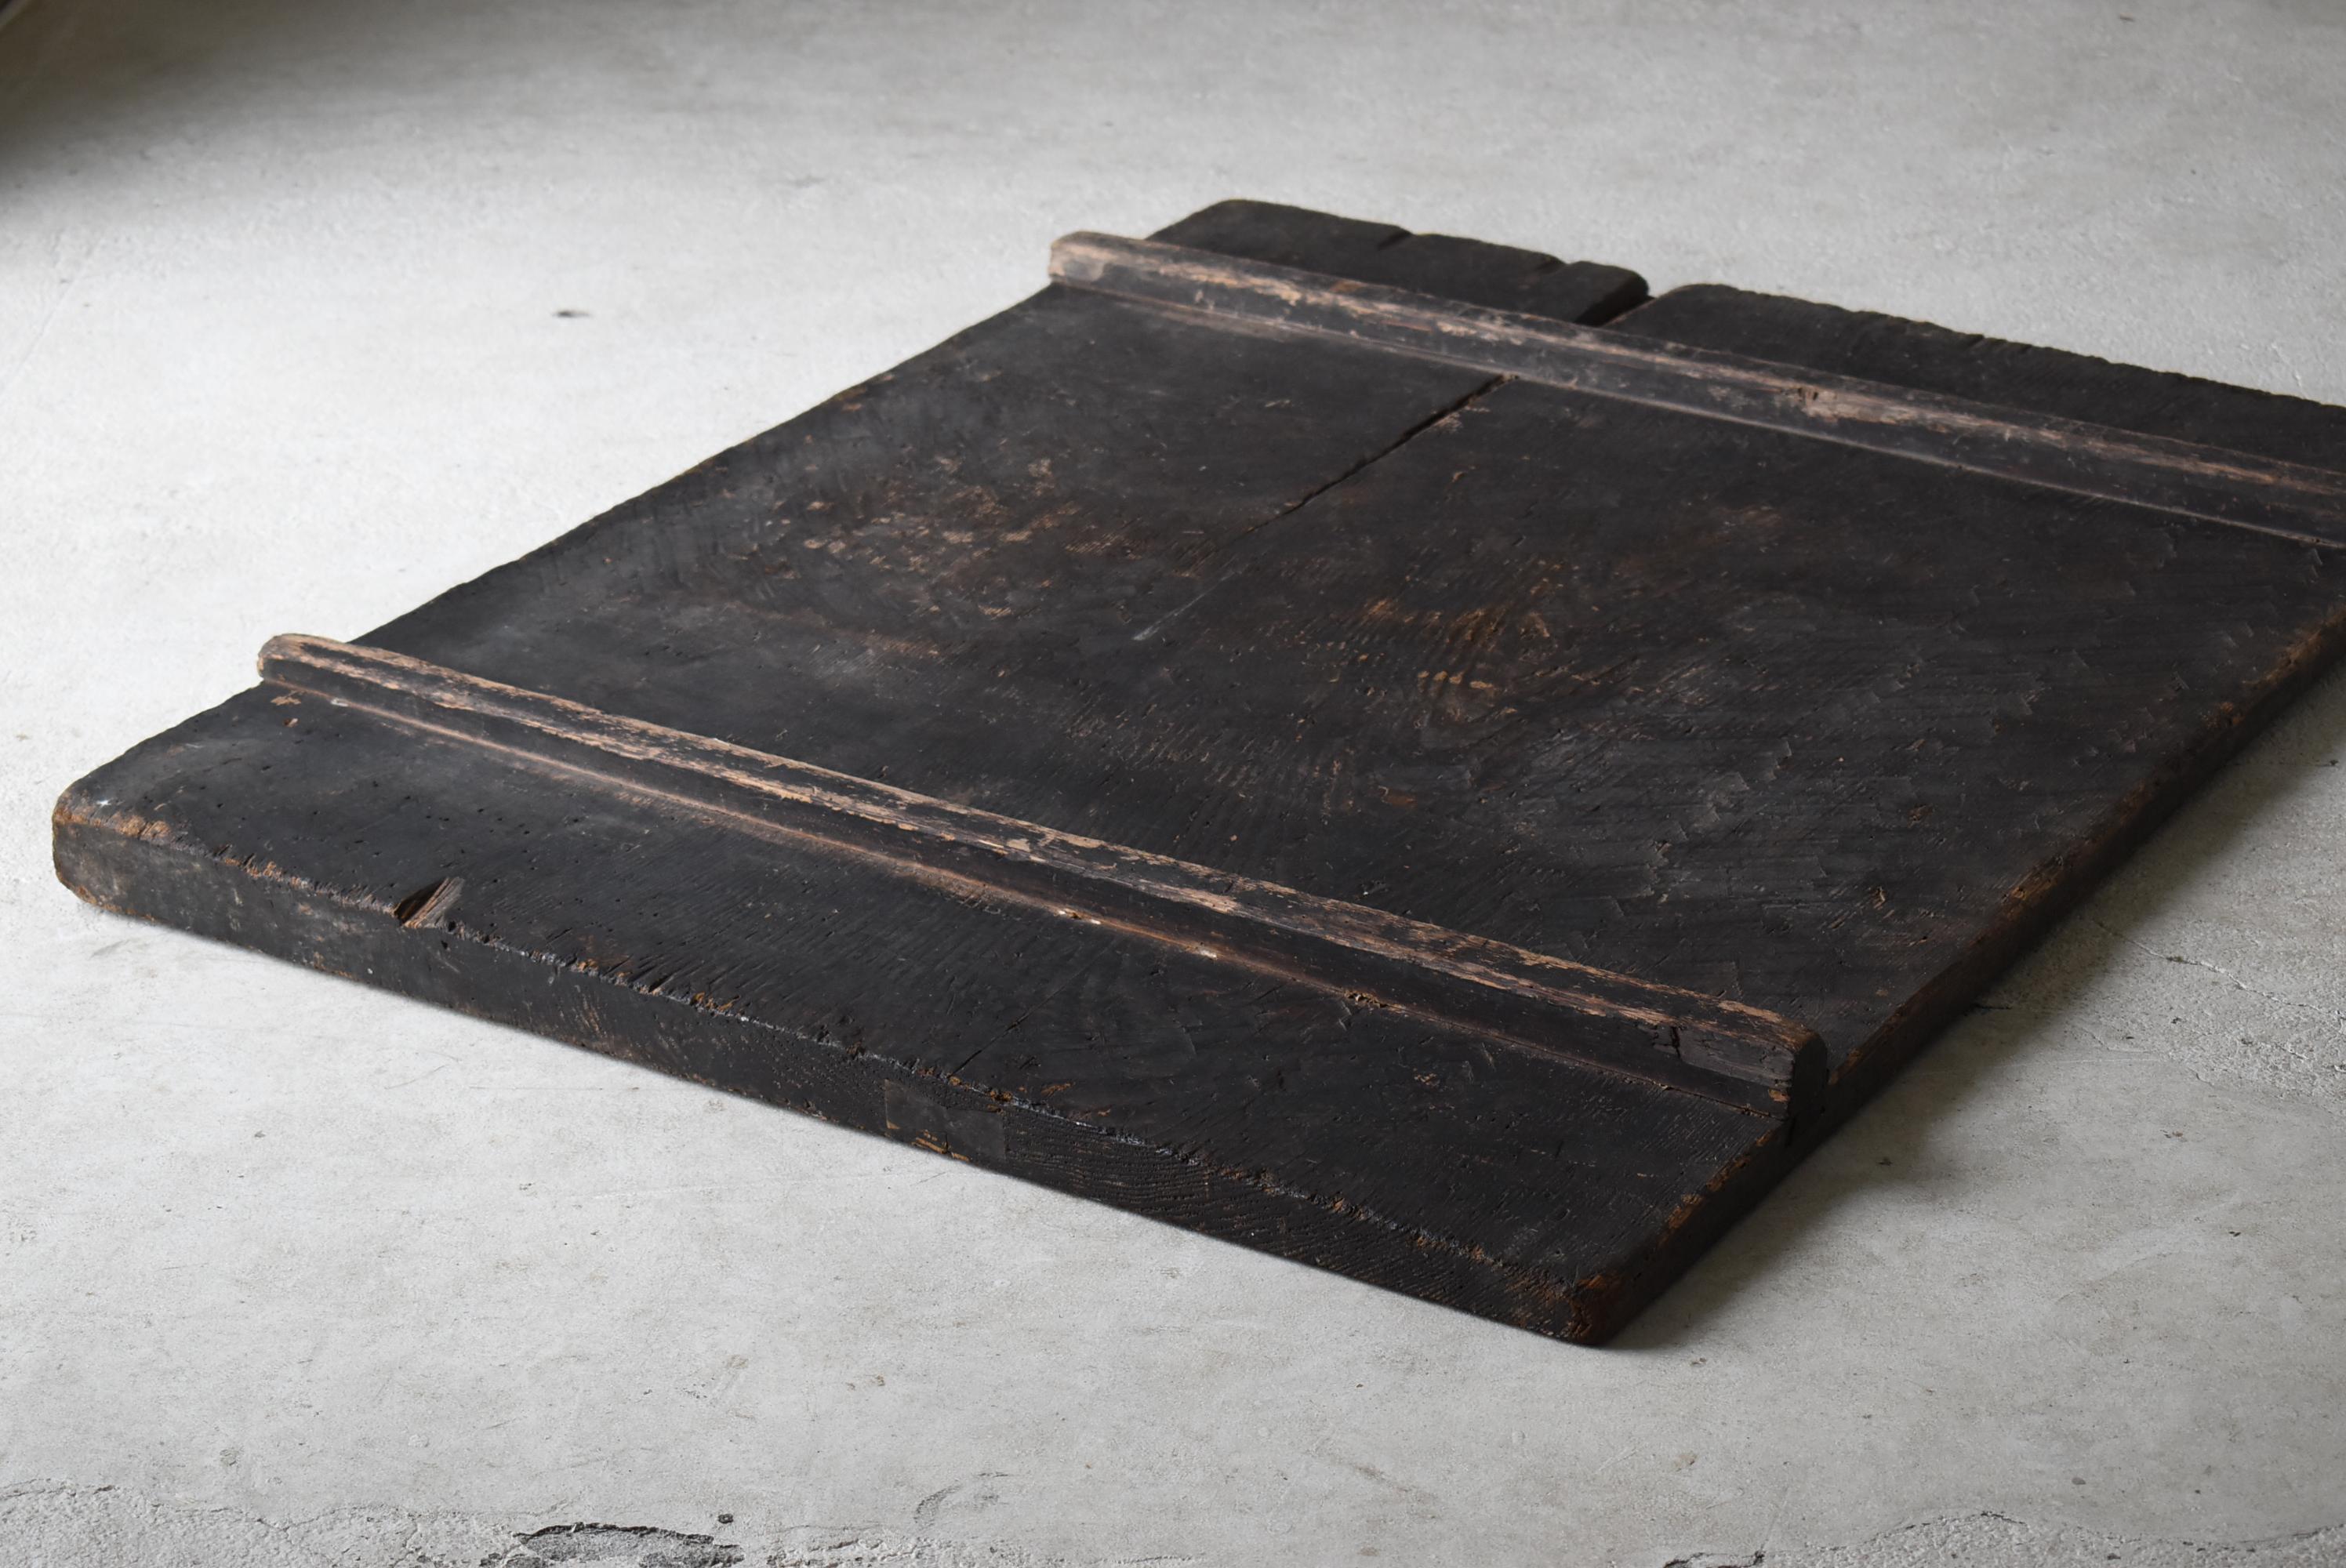 Japanese Antique Extra-Large Wooden board 1860s-1900s / Wabi Sabi Abstract Art 5